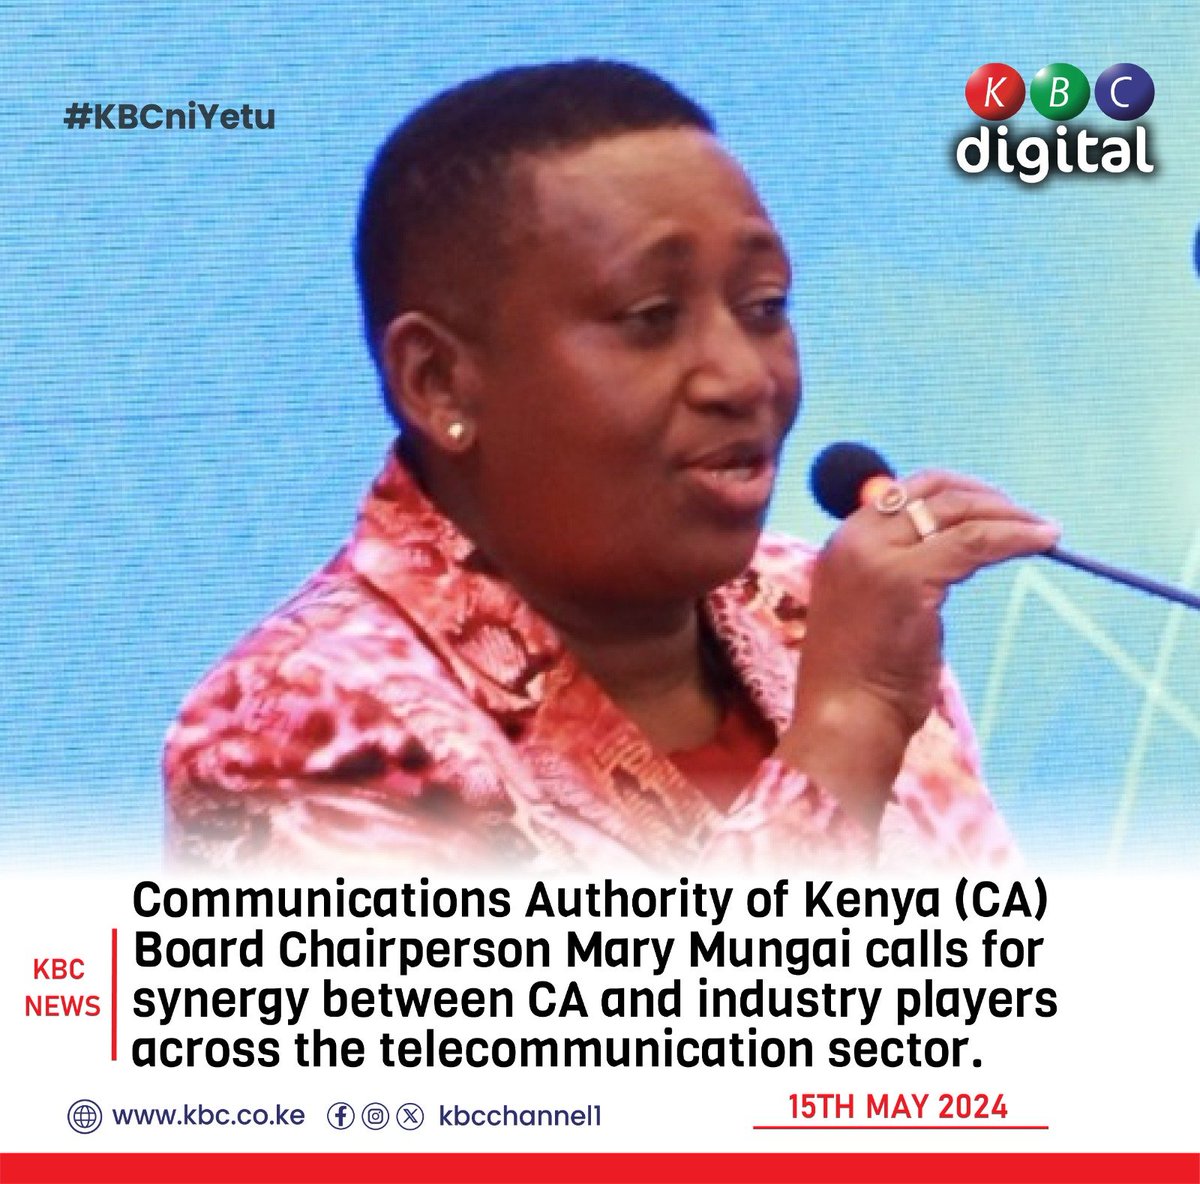 Communications Authority of Kenya (CA) Board Chairperson Mary Mungai calls for synergy between CA and industry players across the telecommunication sector. #KBCniYetu ^RO